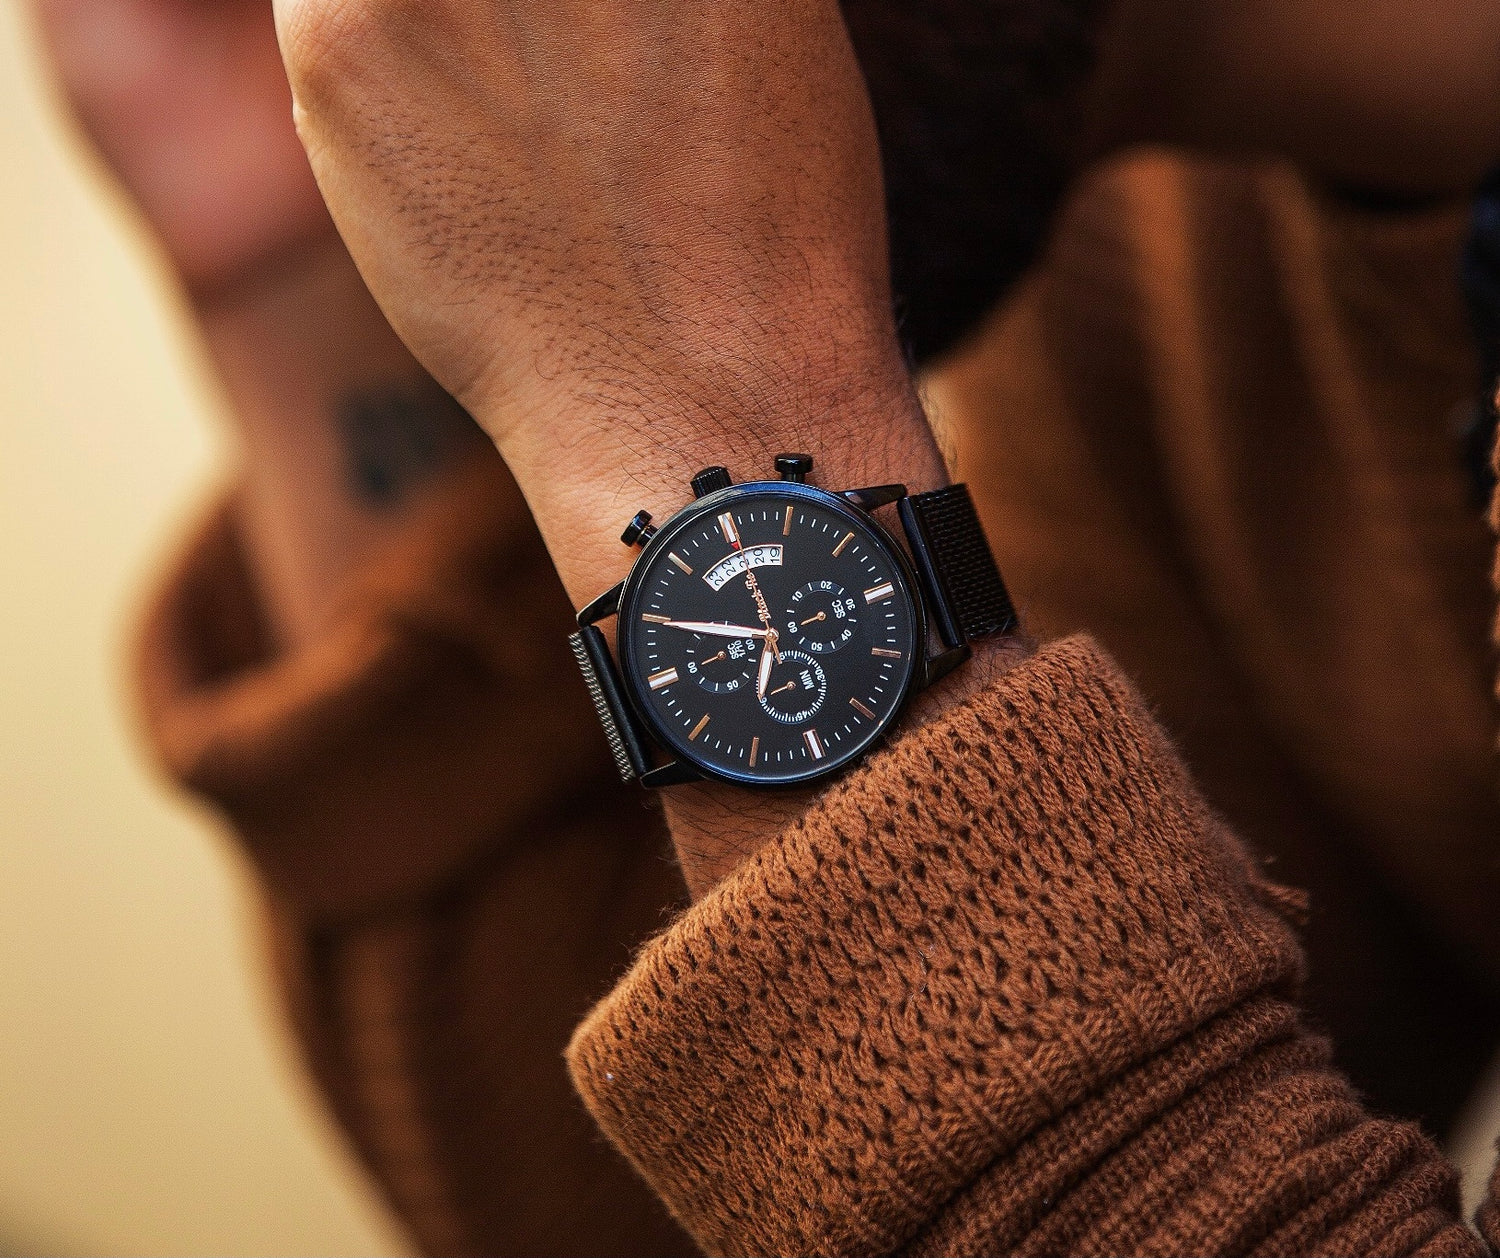 The 10 Best Chronograph Watches Under $100. Affordable Chronos for Men